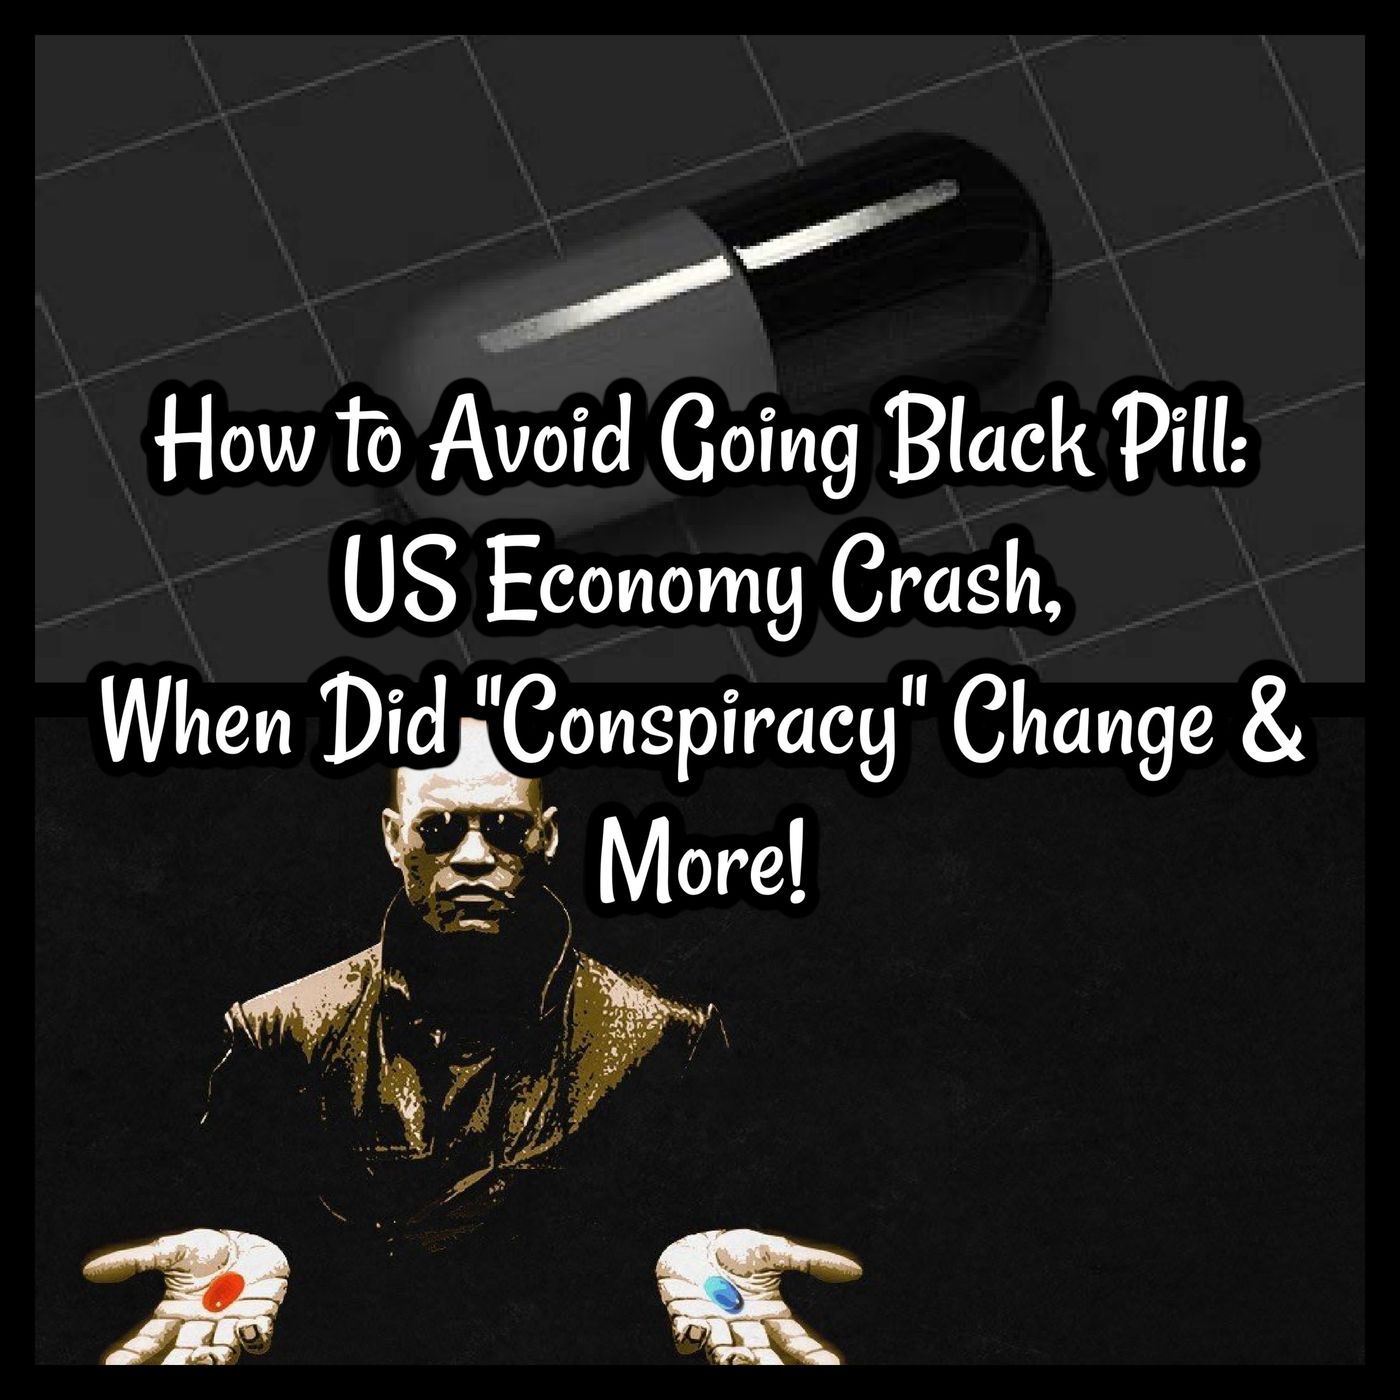 How to Avoid Going Black Pill: US Economy Crash, When Did ”Conspiracy” Change & More!